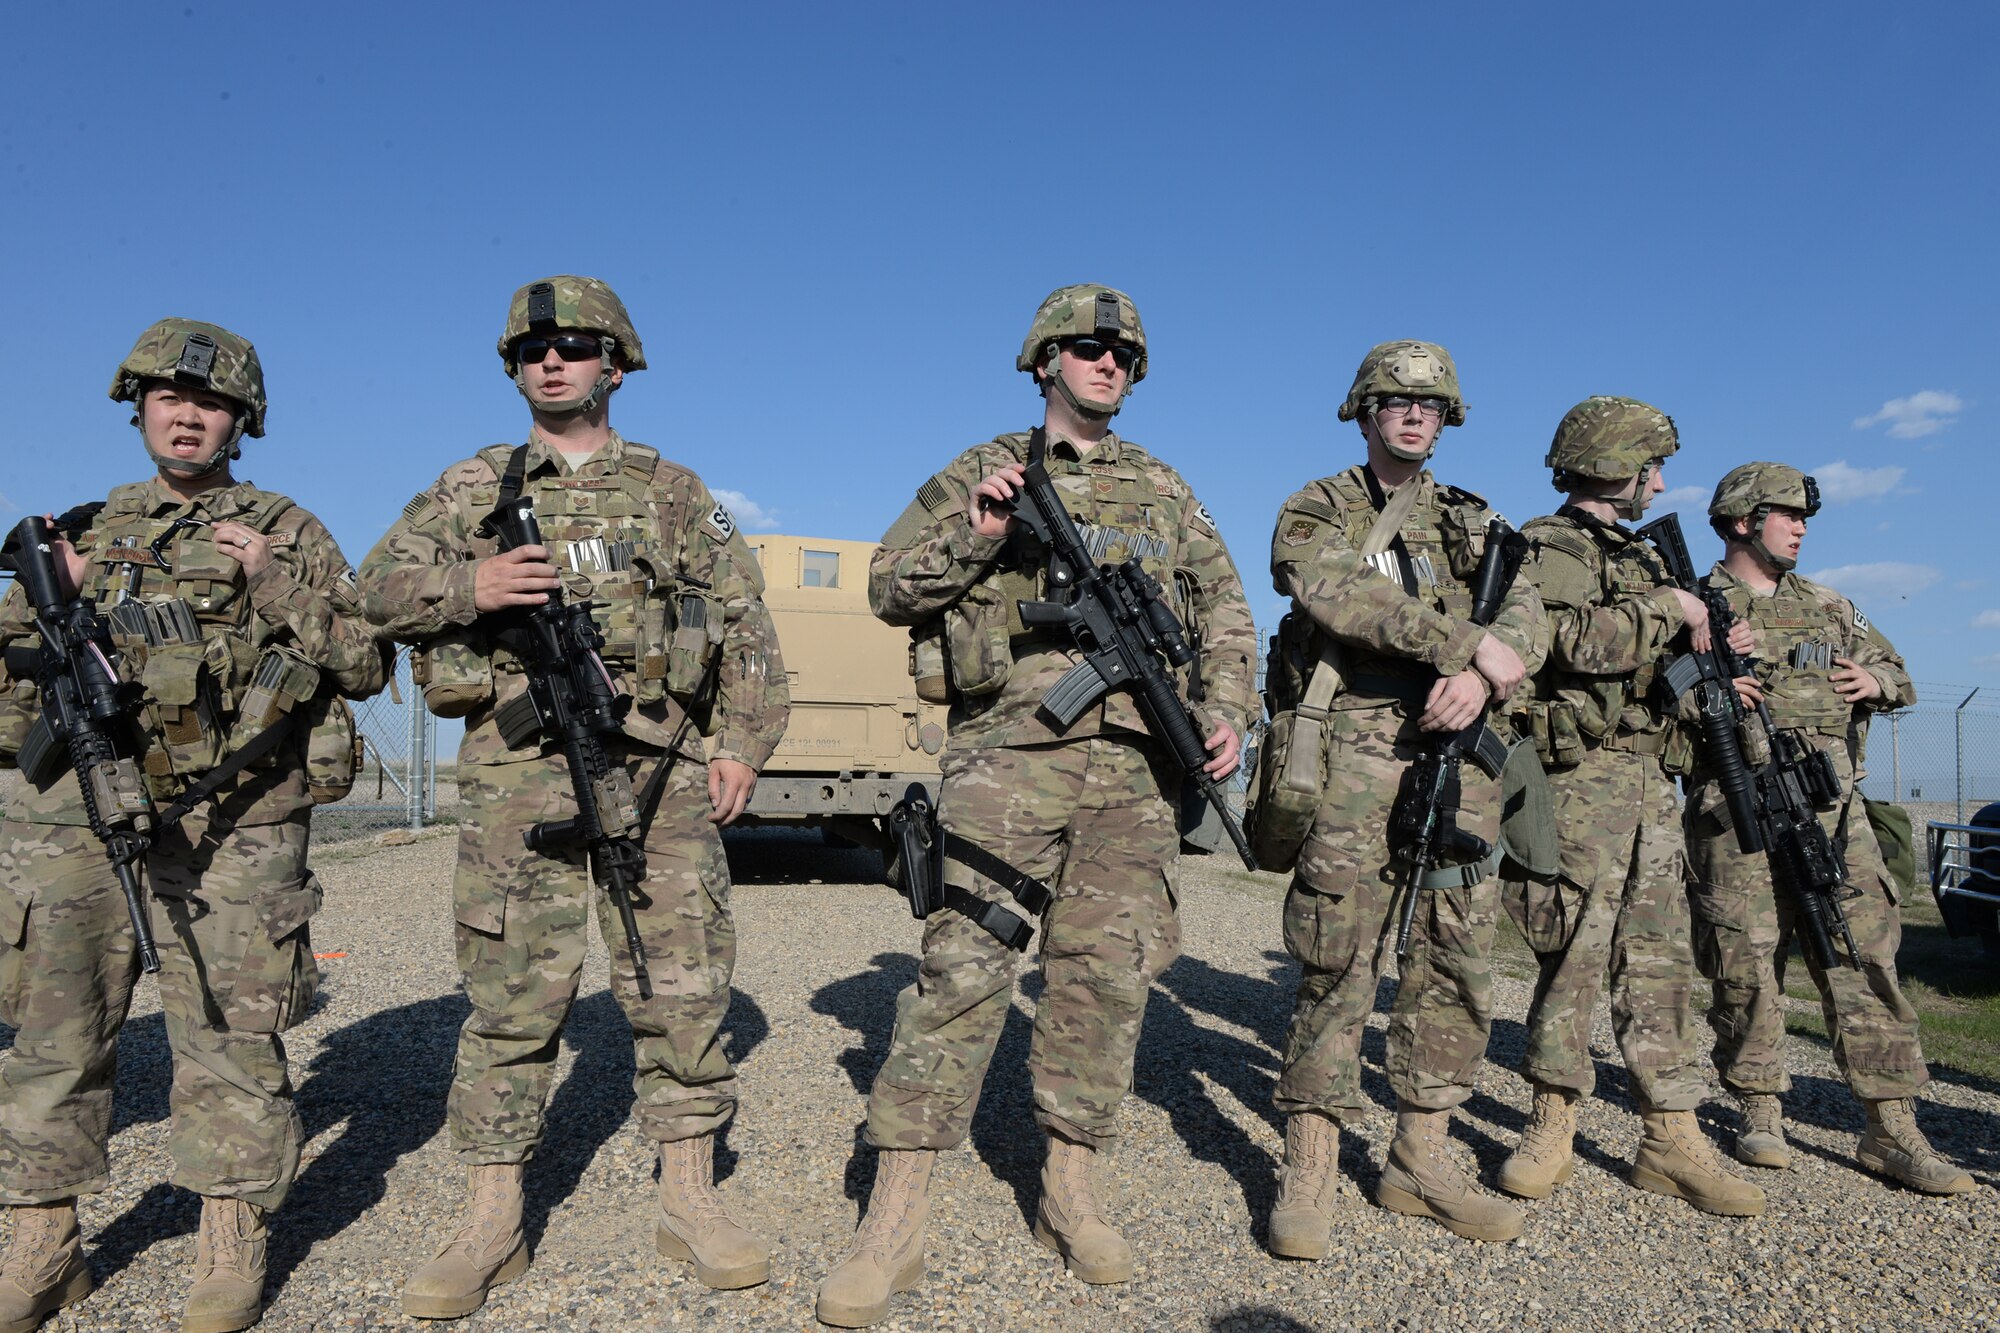 U.S. Air Force and North Dakota Air National Guard personnel in the 91st Missile Security Forces Squadron and the 219th Security Forces Squadron from left to right Staff Sgt. Shareen Mendiola, Tech. Sgt. Nicholas Van Pelt, Staff Sgt. Erik Foss, Airman 1st Class Joseph Pain, Senior Airman Michael McLaughlin and Airman 1st Class Bradley Rayburn listen to a briefing at the conclusion of an exercise at a Minot Air Force Base, North Dakota, launch facility May 20, 2015. The exercise included an intermingled combination of North Dakota Air National Guard members doing their annual training and 91st Missile Security Forces Squadron members performing their day-to-day duties. The Air National Guard members are routinely integrated among the U.S. Air Force active duty personnel as they perform the real-World mission of missile field security in a seamless and indistinguishable manner. (U.S. Air National Guard photo by Senior Master Sgt. David H. Lipp/Released)